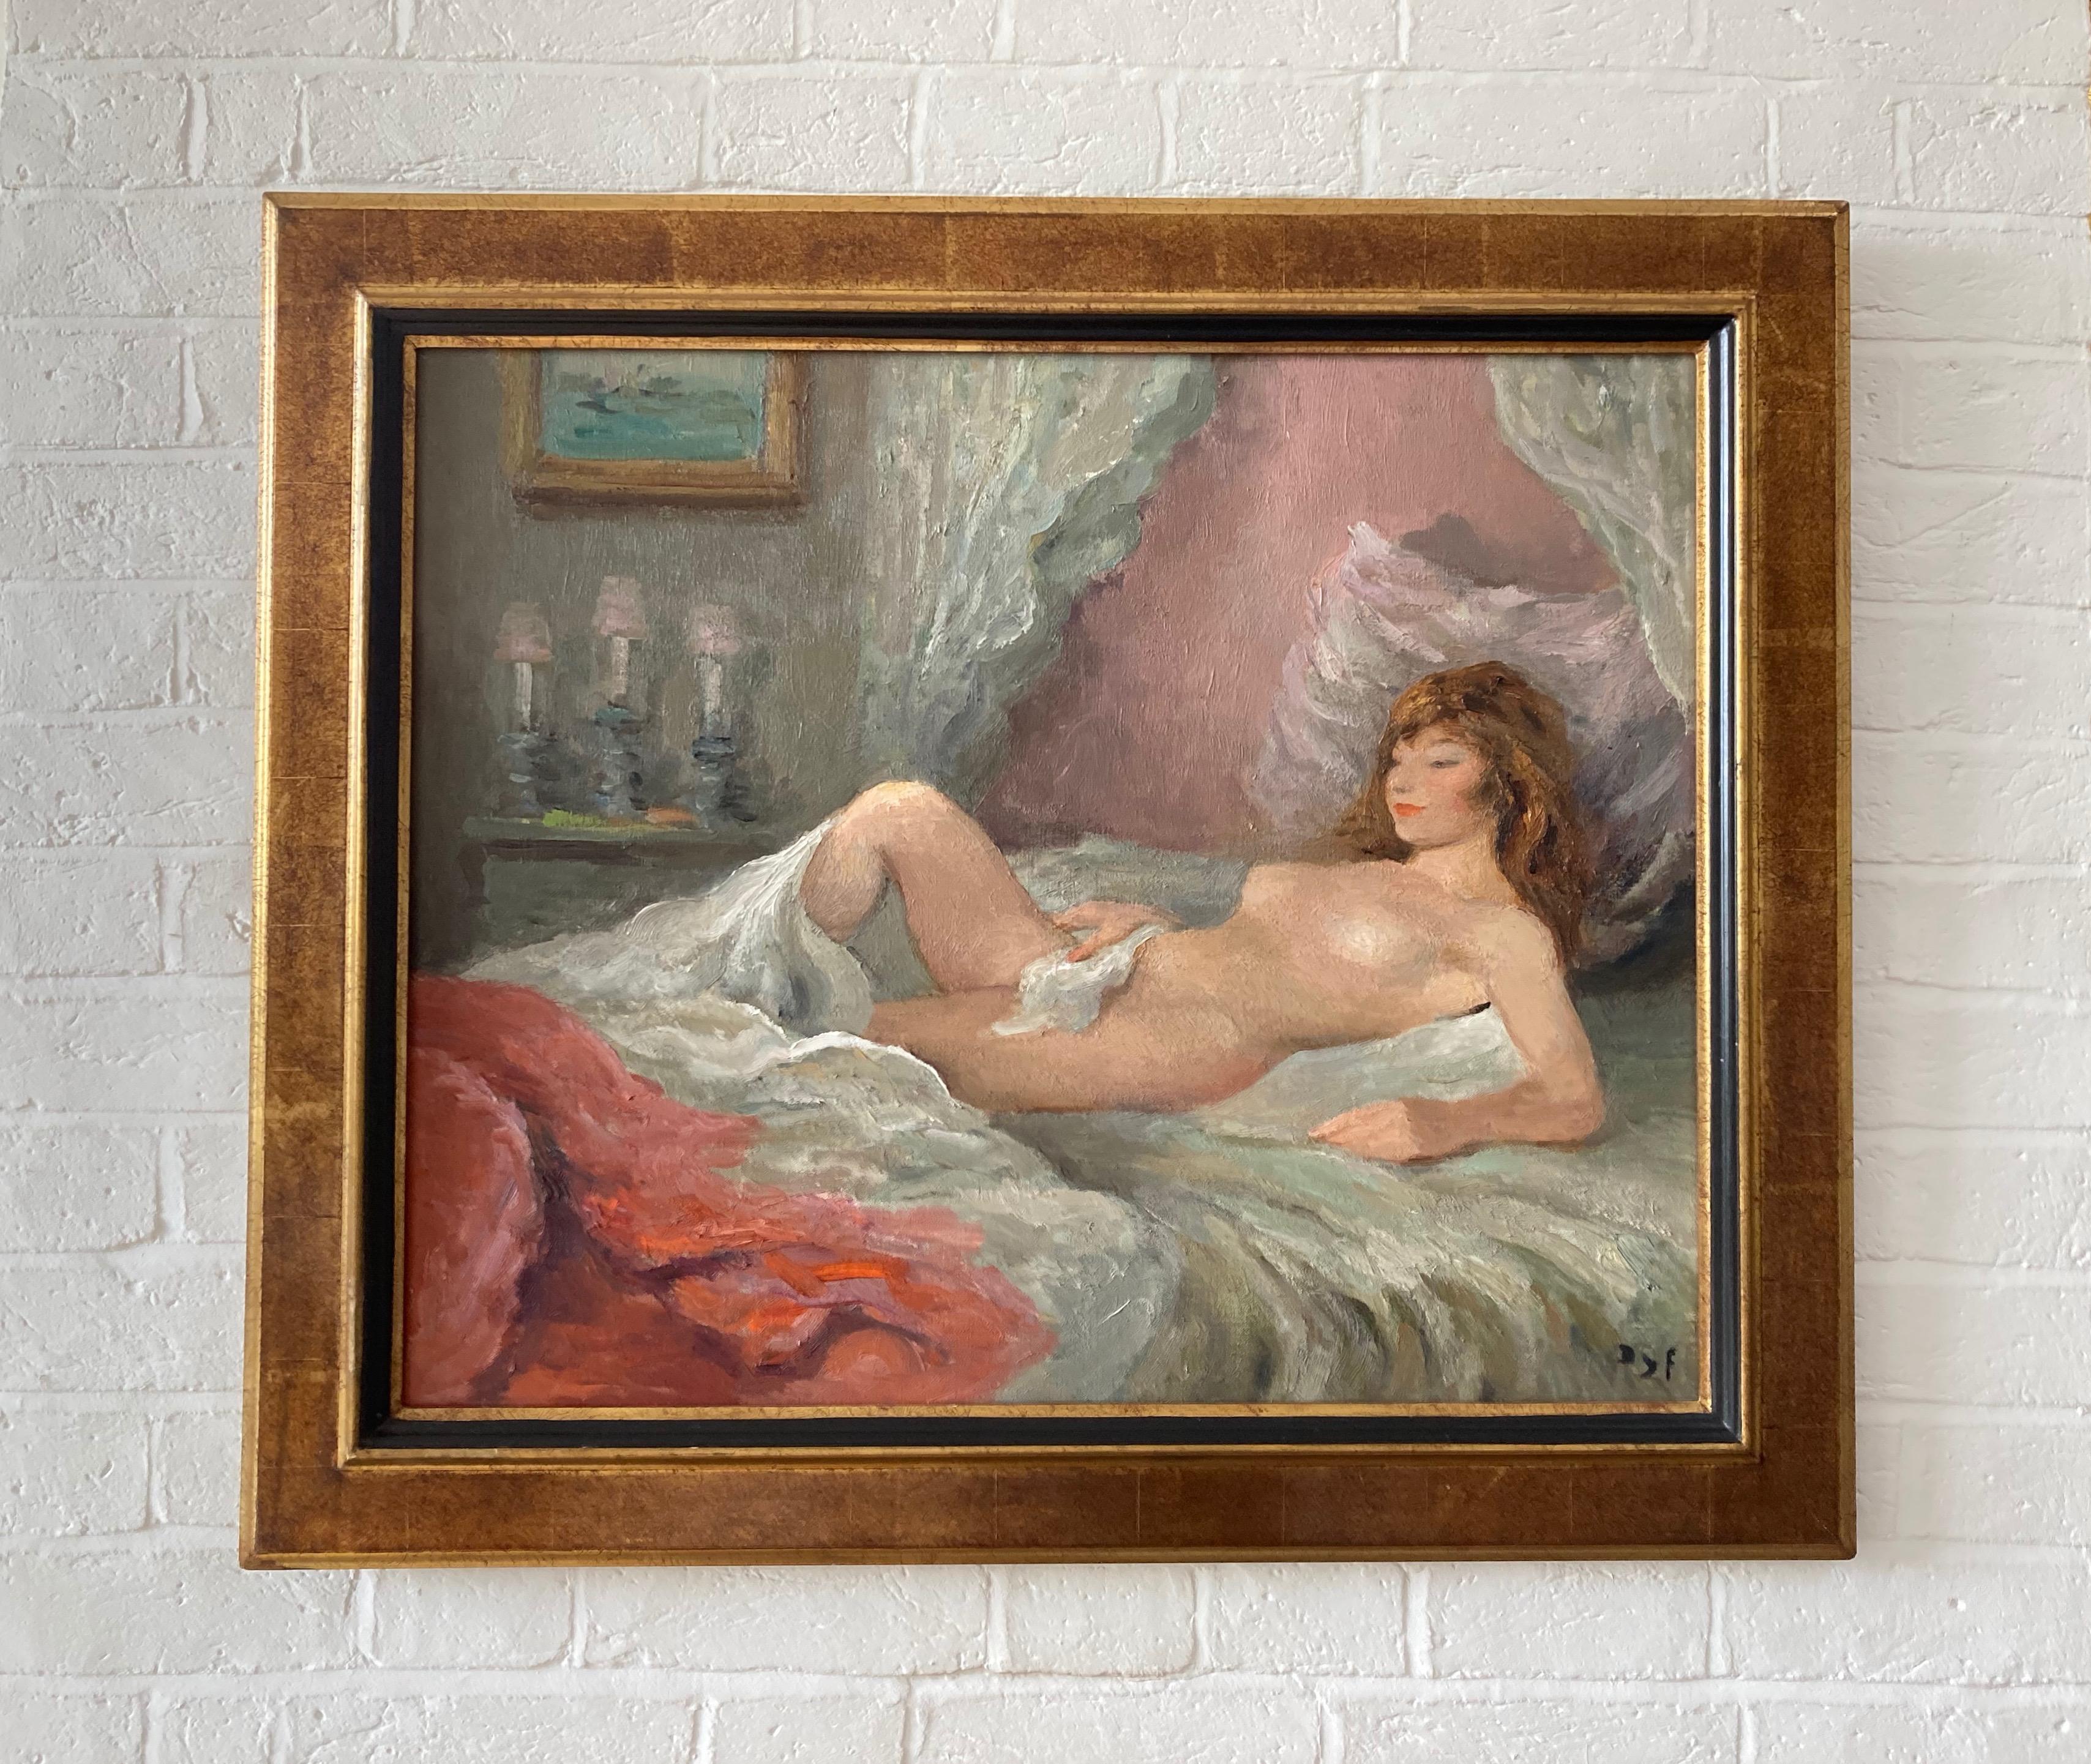 A wonderful example of a reclining nude by Marcel Dyf, painted with characteristic panache; fabulous brushstrokes and colour employed to capture the curves of the model.

Marcel Dyf (1899-1985)
Reclining nude
Signed
Oil on canvas
23½ x 28¾